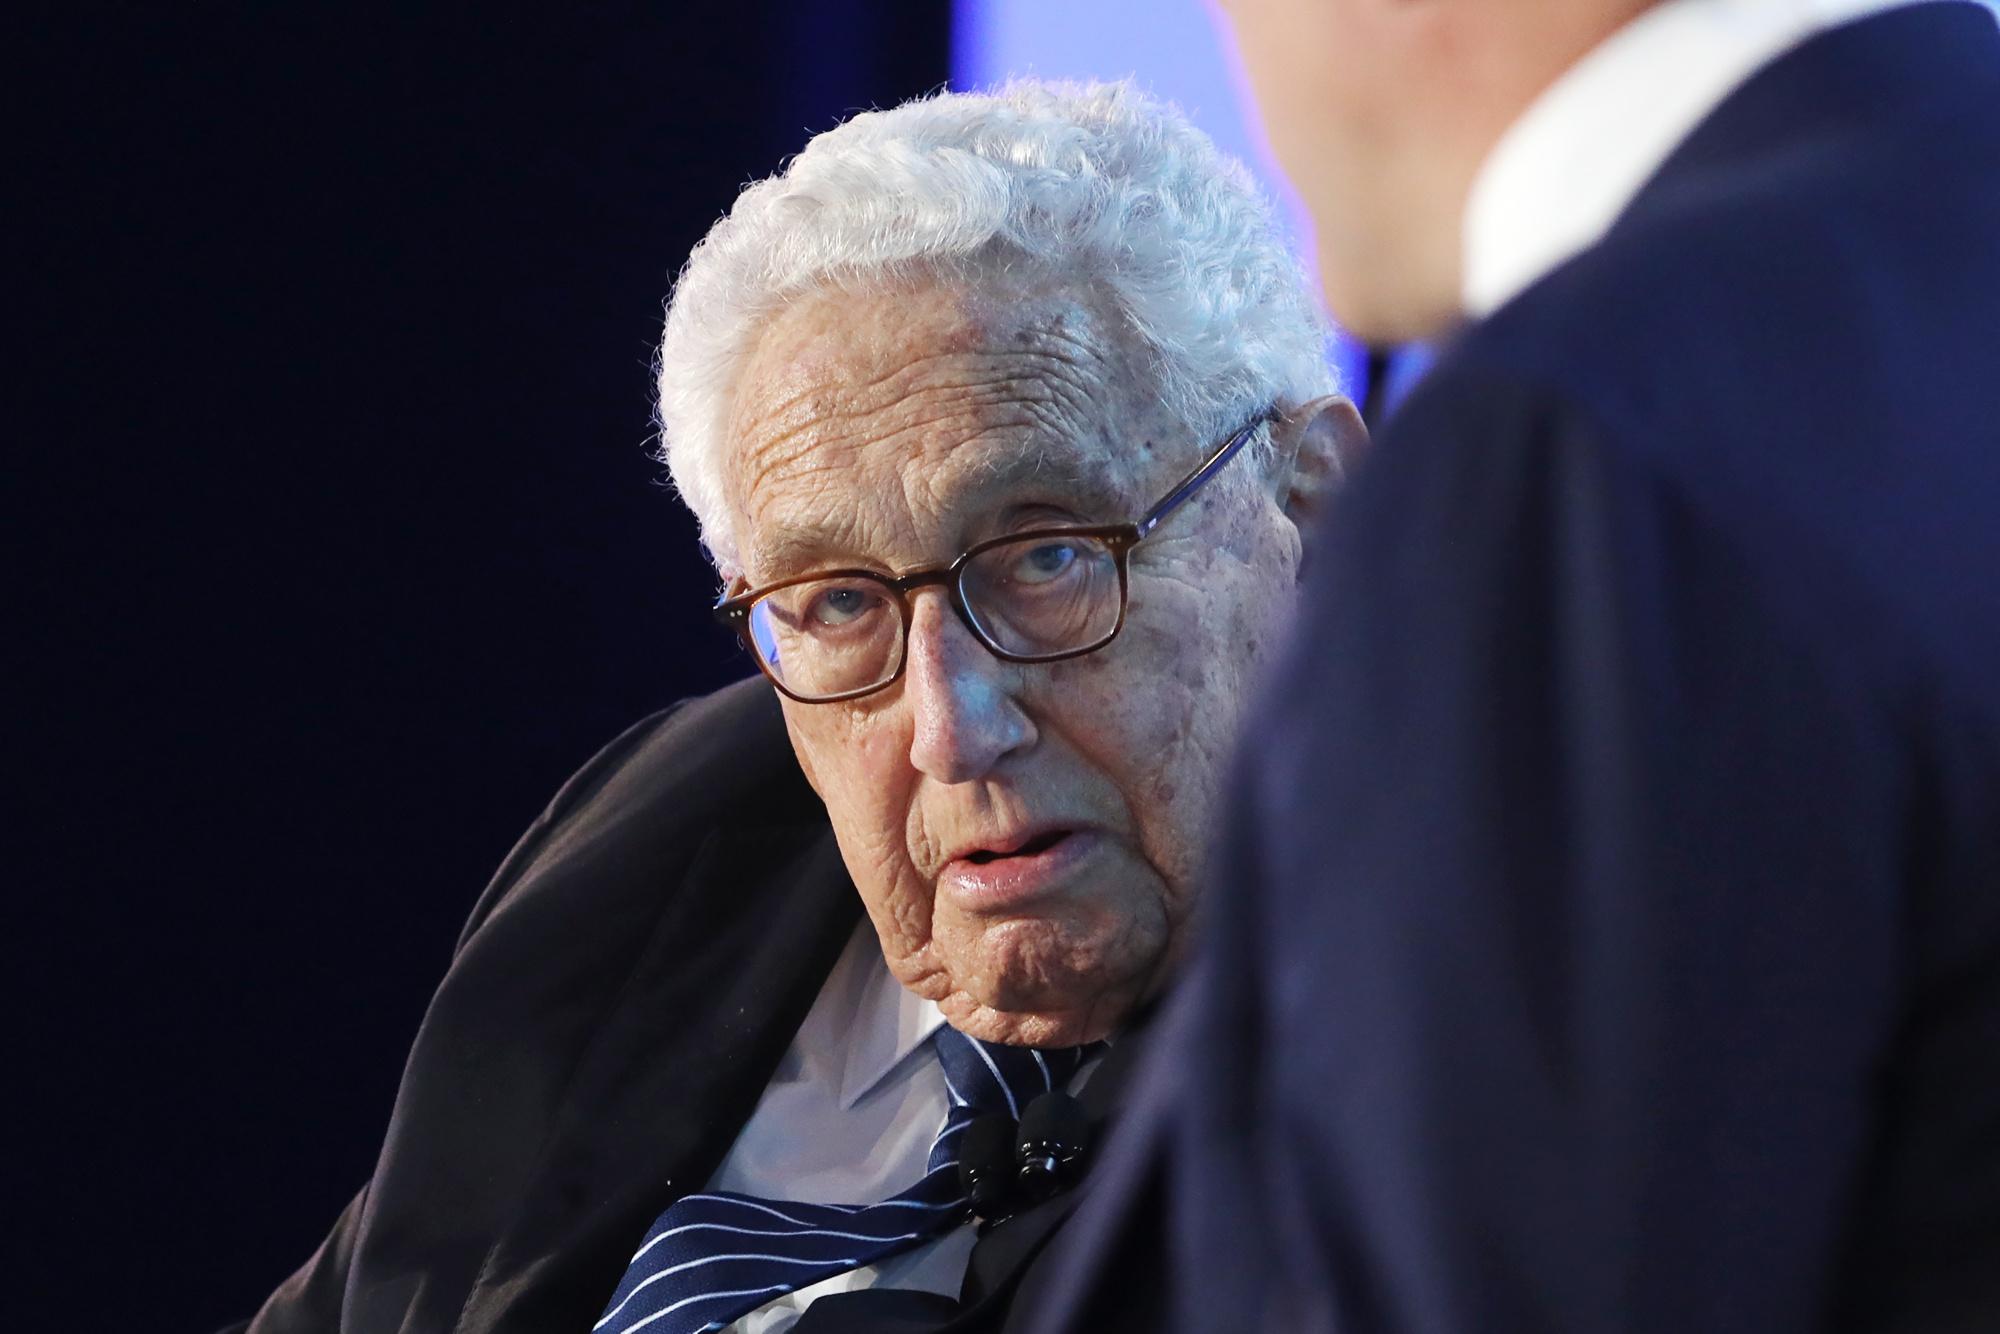 "Primitive lobbyist": Podolyak responded harshly to Kissinger about negotiations with the Russian Federation